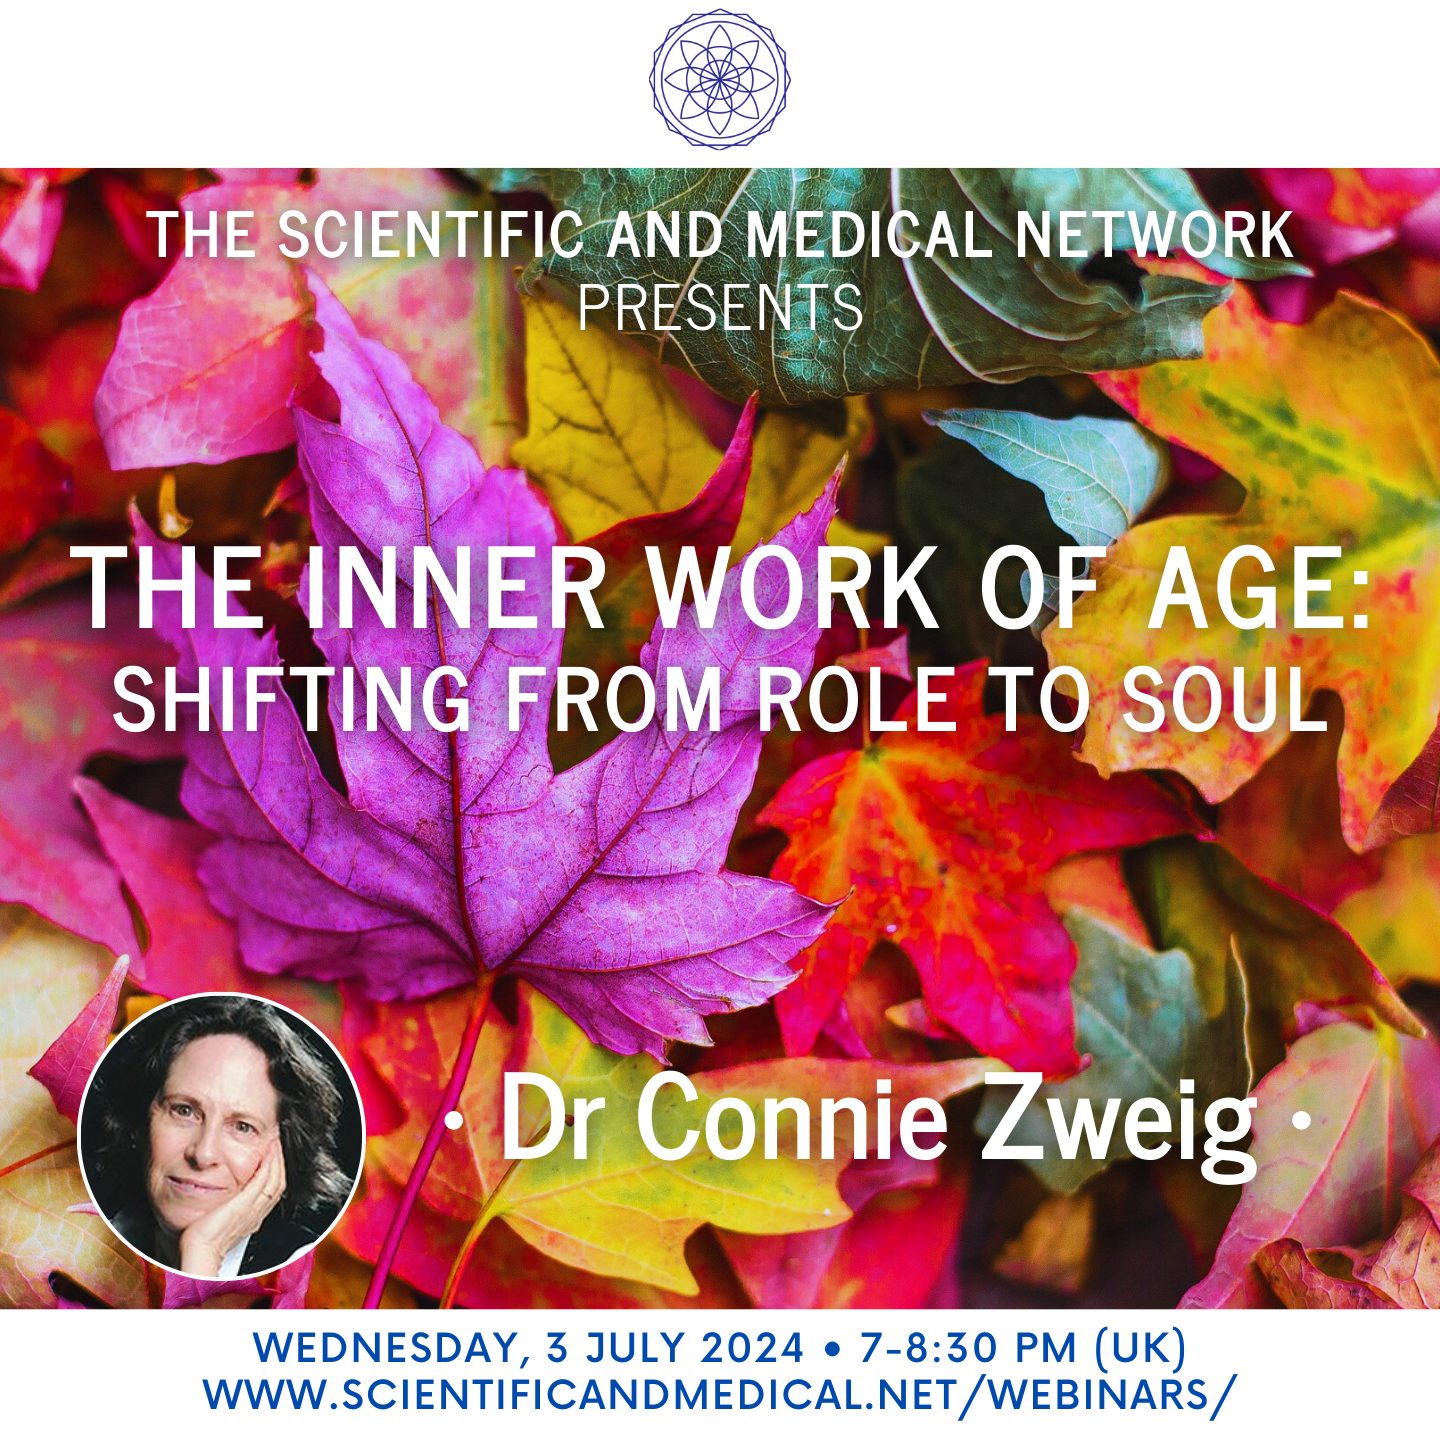 Dr Connie Zweig The Inner Work of Age 20240525 145458 0000